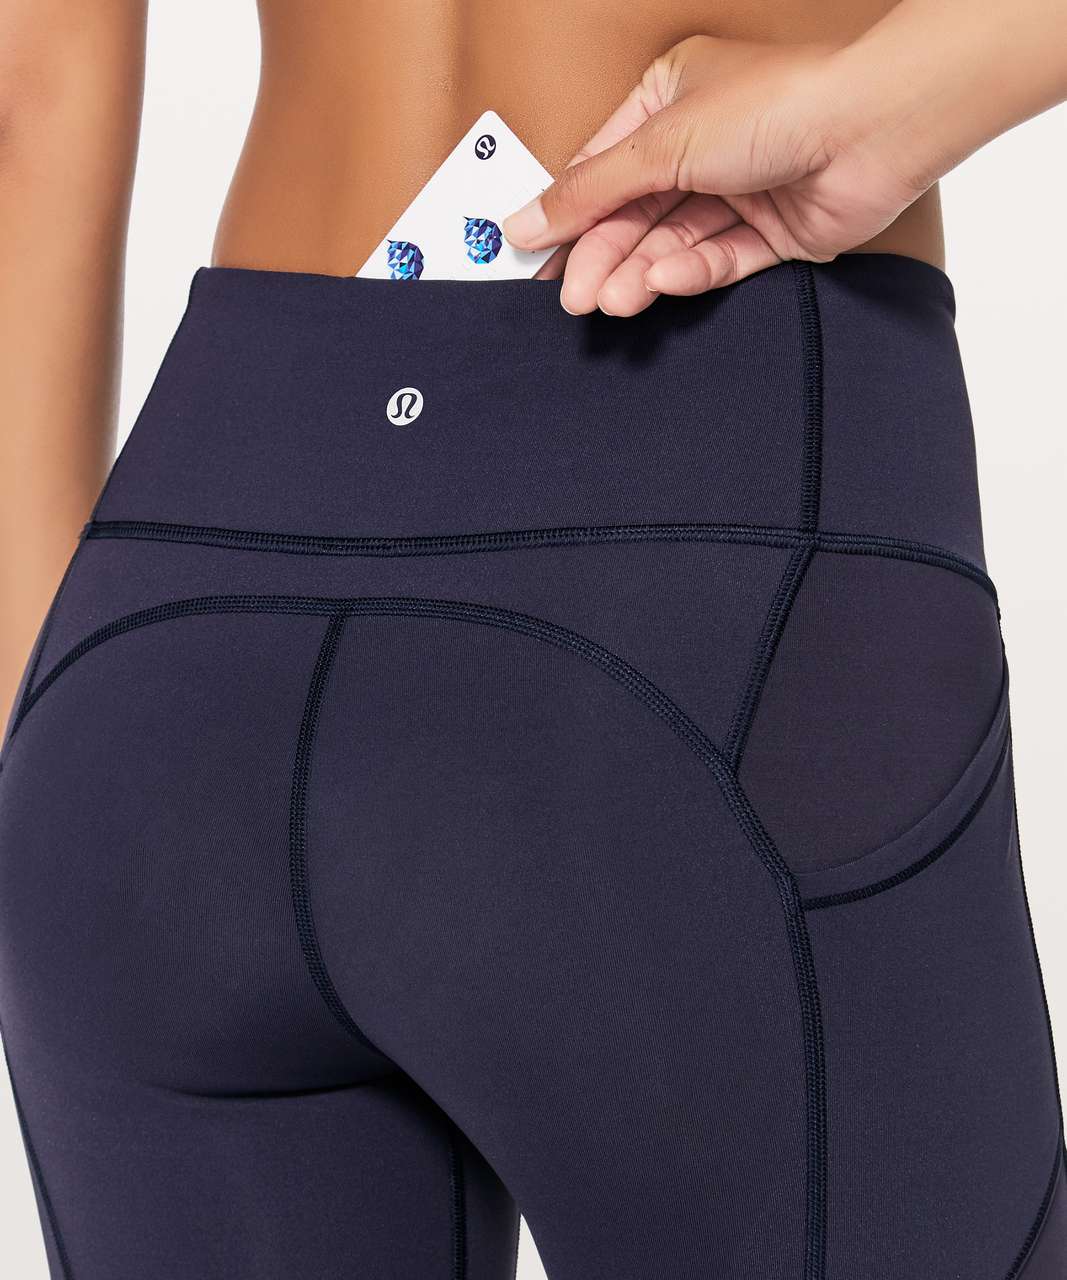 Lululemon All The Right Places Pant II *28